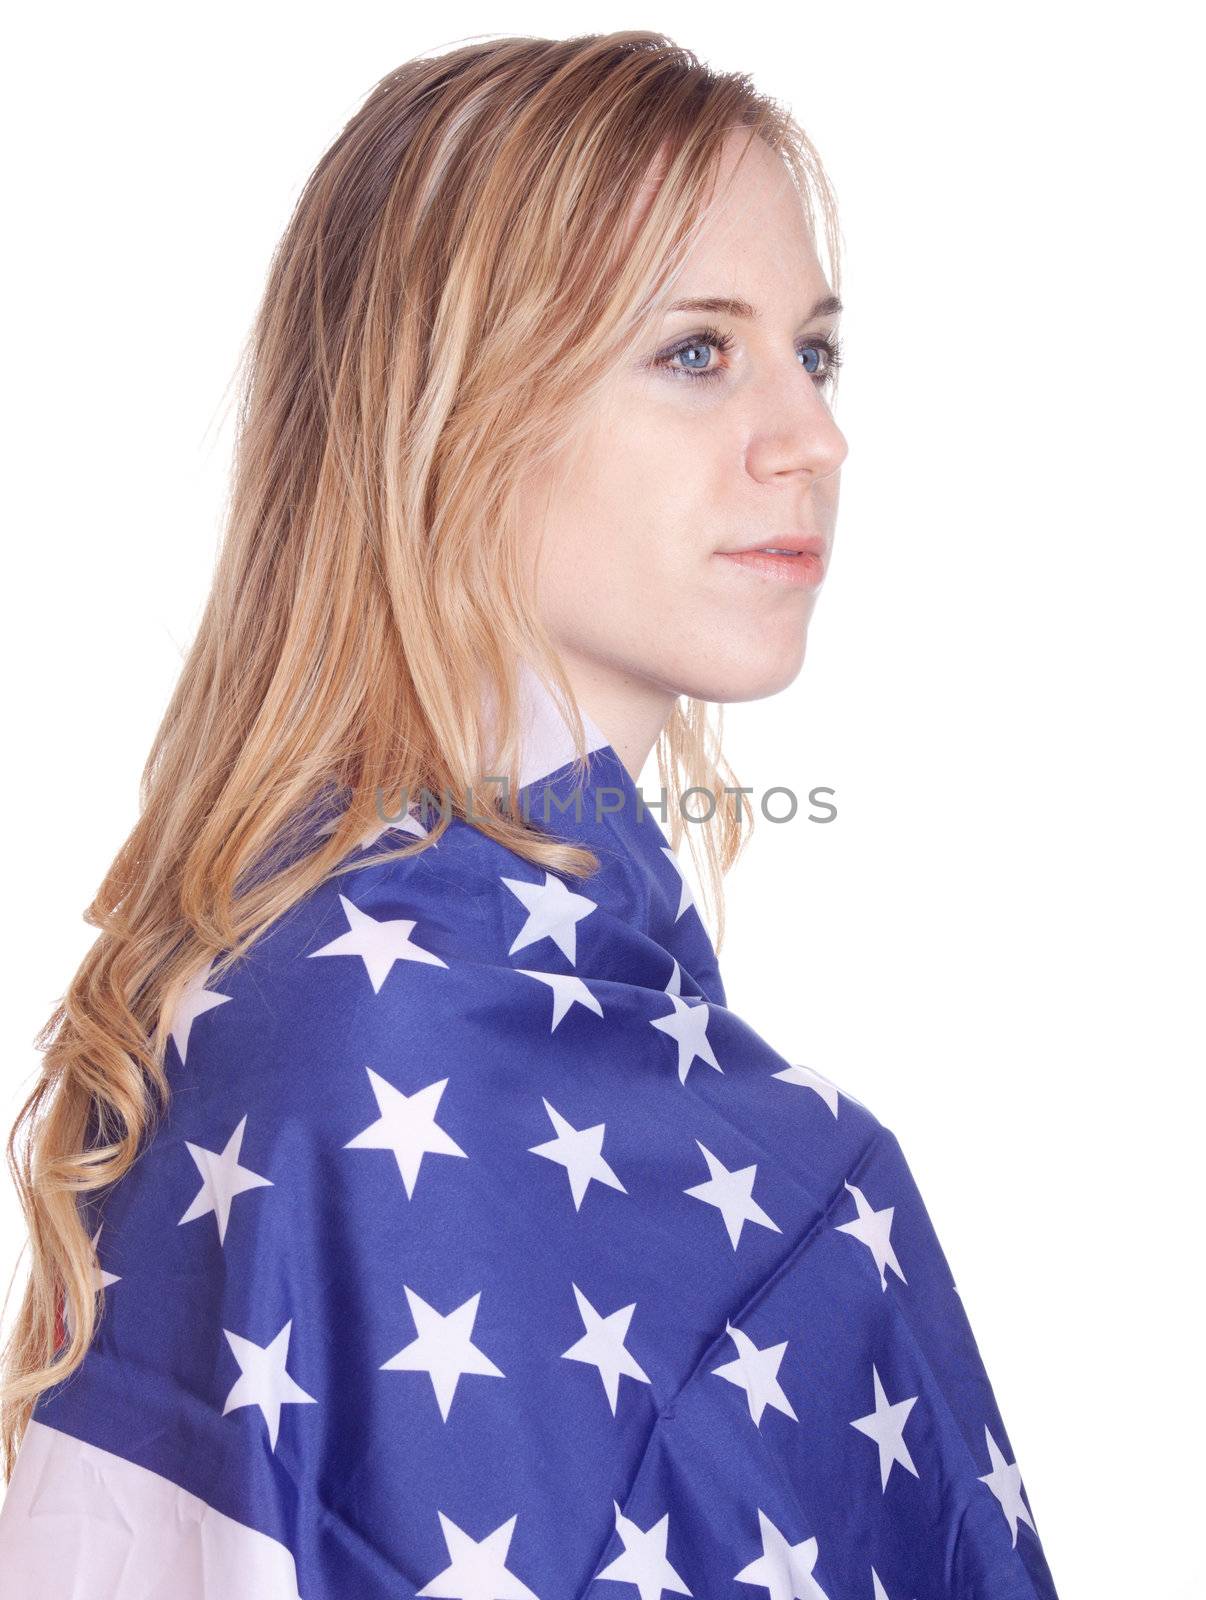 A blond girl has an American flag wrapped around her.